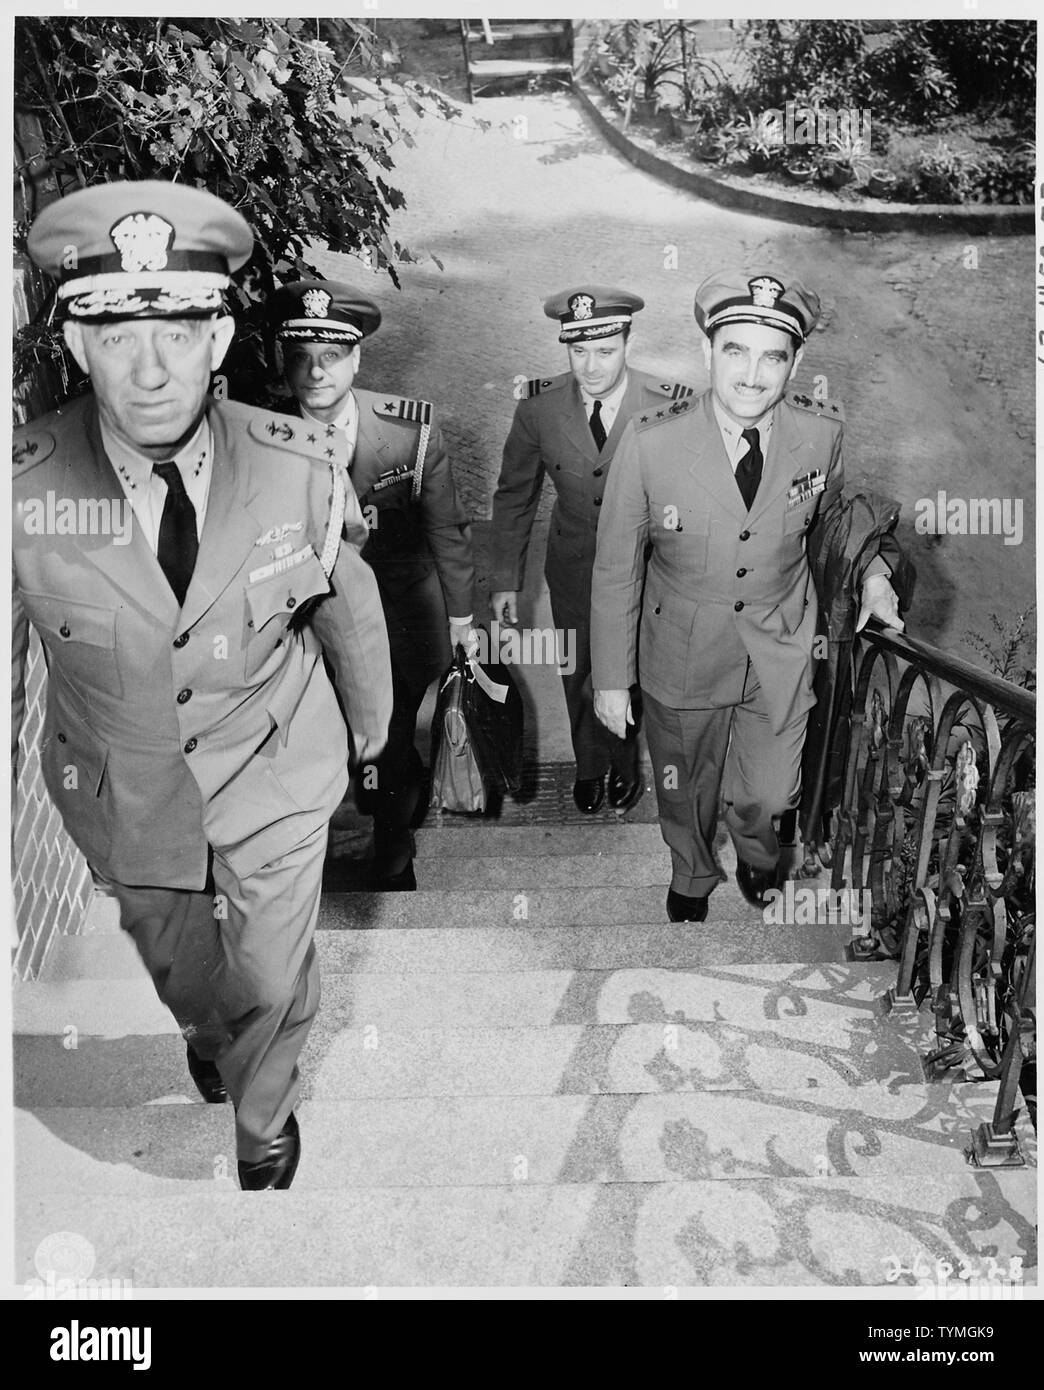 The staff officers of Fleet Admiral Ernest J. King, U. S. Navy, ascend steps to their quarters near the Little White House (residence of President Harry S. Truman during the Potsdam Conference) in Babelsburg, Germany. Left front, Vice Admiral G. M. Cooke, Jr. Chief of Staff for Cominch; right front, Rear Admiral H. L. Naples of the Military Mission to Moscow; left rear, Captain A. S. McDill, aide-de-camp to Cominch; and right rear, Commander E. J. Gough, Medical Corps, U. S. Naval Reserve. Stock Photo